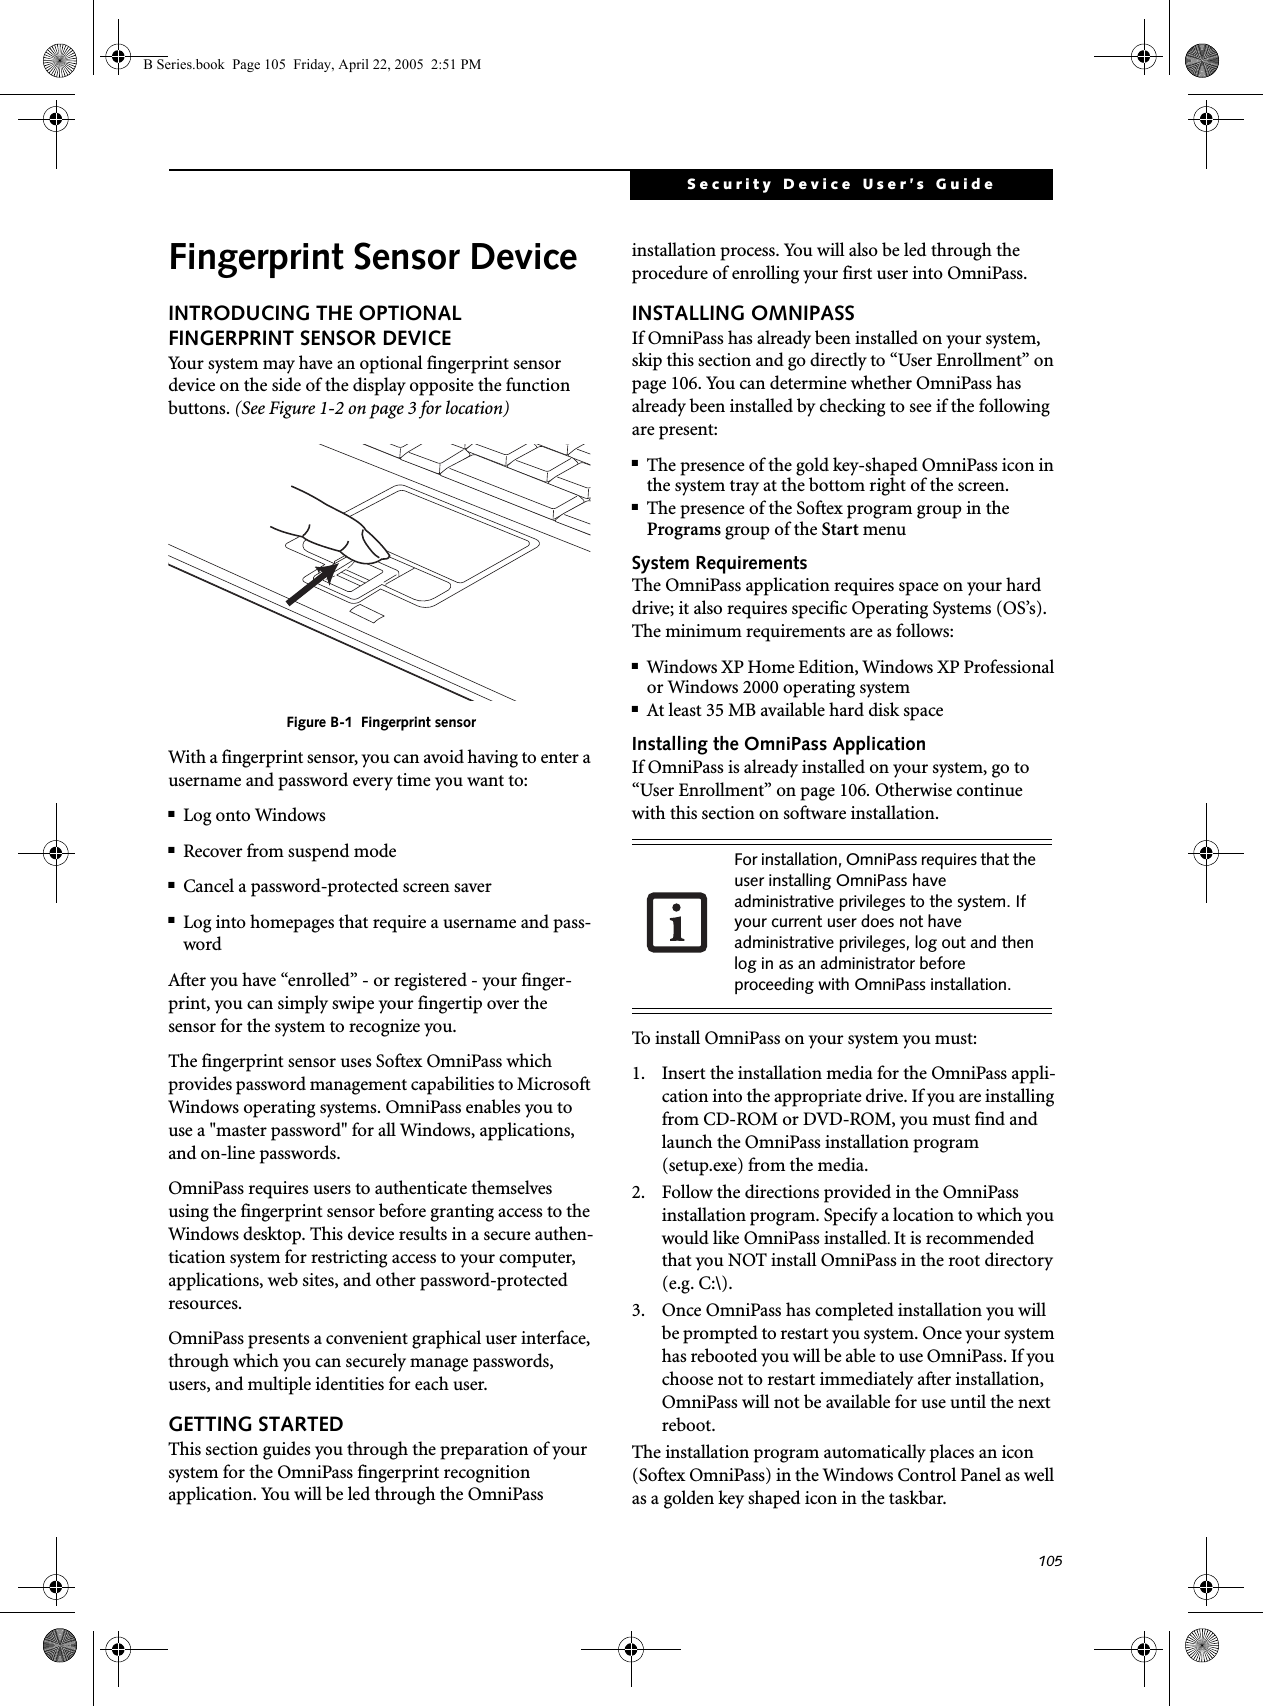 105Security Device User’s GuideFingerprint Sensor DeviceINTRODUCING THE OPTIONAL FINGERPRINT SENSOR DEVICEYour system may have an optional fingerprint sensor device on the side of the display opposite the function buttons. (See Figure 1-2 on page 3 for location) Figure B-1  Fingerprint sensorWith a fingerprint sensor, you can avoid having to enter a username and password every time you want to:■Log onto Windows■Recover from suspend mode■Cancel a password-protected screen saver■Log into homepages that require a username and pass-wordAfter you have “enrolled” - or registered - your finger-print, you can simply swipe your fingertip over the sensor for the system to recognize you. The fingerprint sensor uses Softex OmniPass which provides password management capabilities to Microsoft Windows operating systems. OmniPass enables you to use a &quot;master password&quot; for all Windows, applications, and on-line passwords. OmniPass requires users to authenticate themselves using the fingerprint sensor before granting access to the Windows desktop. This device results in a secure authen-tication system for restricting access to your computer, applications, web sites, and other password-protected resources.OmniPass presents a convenient graphical user interface, through which you can securely manage passwords, users, and multiple identities for each user.GETTING STARTEDThis section guides you through the preparation of your system for the OmniPass fingerprint recognition application. You will be led through the OmniPass installation process. You will also be led through the procedure of enrolling your first user into OmniPass. INSTALLING OMNIPASSIf OmniPass has already been installed on your system, skip this section and go directly to “User Enrollment” on page 106. You can determine whether OmniPass has already been installed by checking to see if the following are present:■The presence of the gold key-shaped OmniPass icon in the system tray at the bottom right of the screen.■The presence of the Softex program group in the Programs group of the Start menuSystem RequirementsThe OmniPass application requires space on your hard drive; it also requires specific Operating Systems (OS’s). The minimum requirements are as follows:■Windows XP Home Edition, Windows XP Professional or Windows 2000 operating system■At least 35 MB available hard disk spaceInstalling the OmniPass ApplicationIf OmniPass is already installed on your system, go to “User Enrollment” on page 106. Otherwise continue with this section on software installation.To install OmniPass on your system you must:1.  Insert the installation media for the OmniPass appli-cation into the appropriate drive. If you are installing from CD-ROM or DVD-ROM, you must find and launch the OmniPass installation program (setup.exe) from the media.2.  Follow the directions provided in the OmniPass installation program. Specify a location to which you would like OmniPass installed. It is recommended that you NOT install OmniPass in the root directory (e.g. C:\). 3.  Once OmniPass has completed installation you will be prompted to restart you system. Once your system has rebooted you will be able to use OmniPass. If you choose not to restart immediately after installation, OmniPass will not be available for use until the next reboot.The installation program automatically places an icon (Softex OmniPass) in the Windows Control Panel as well as a golden key shaped icon in the taskbar. For installation, OmniPass requires that the user installing OmniPass have administrative privileges to the system. If your current user does not have administrative privileges, log out and then log in as an administrator before proceeding with OmniPass installation.B Series.book  Page 105  Friday, April 22, 2005  2:51 PM